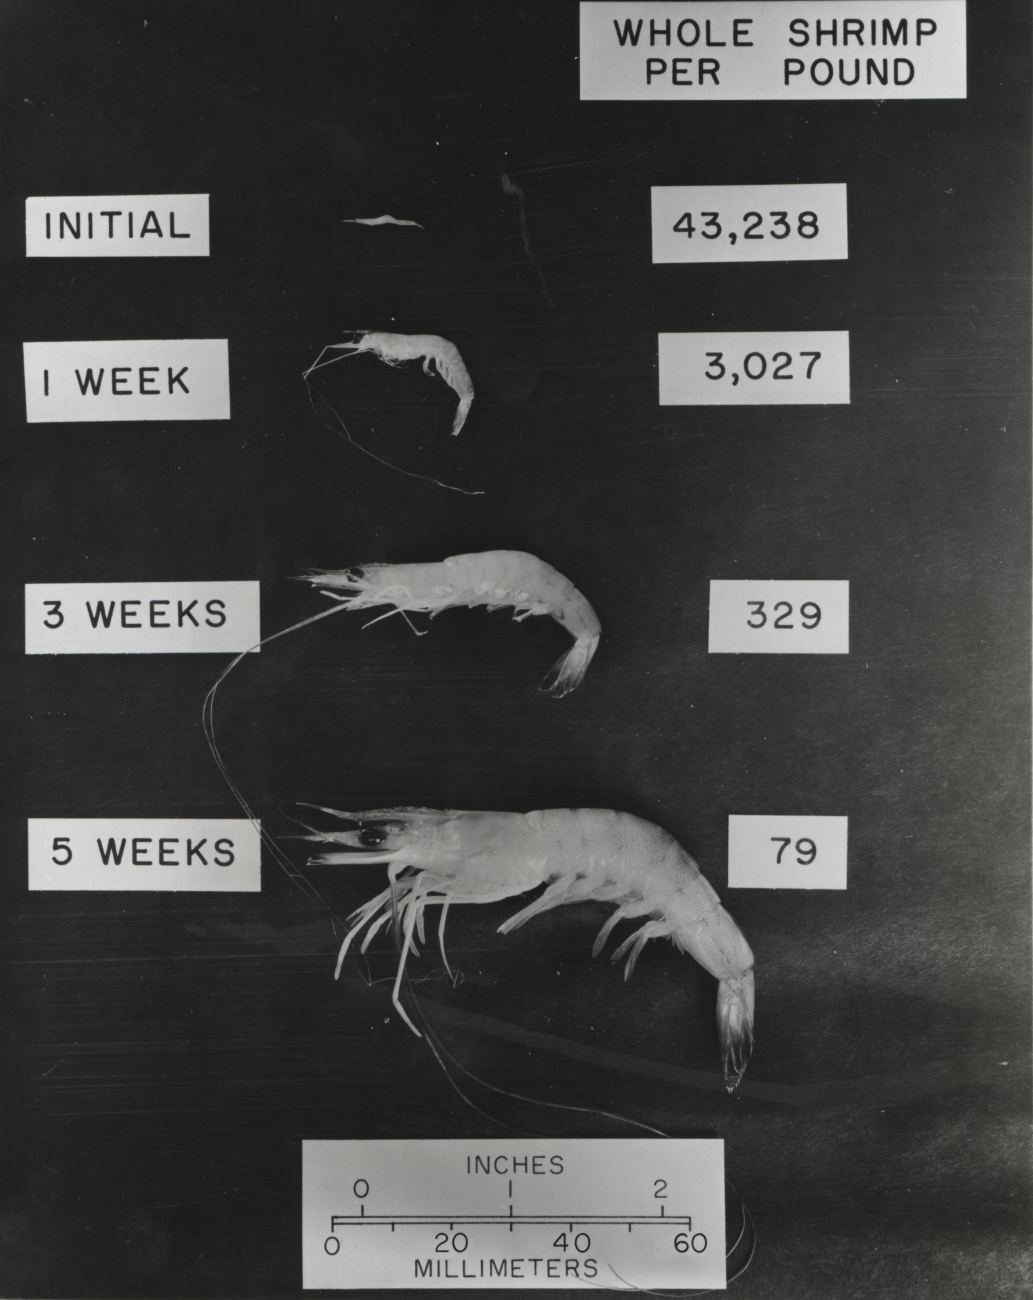 Growth of white shrimp (Penaeus setiferus) over a six-week period in anartificial environment